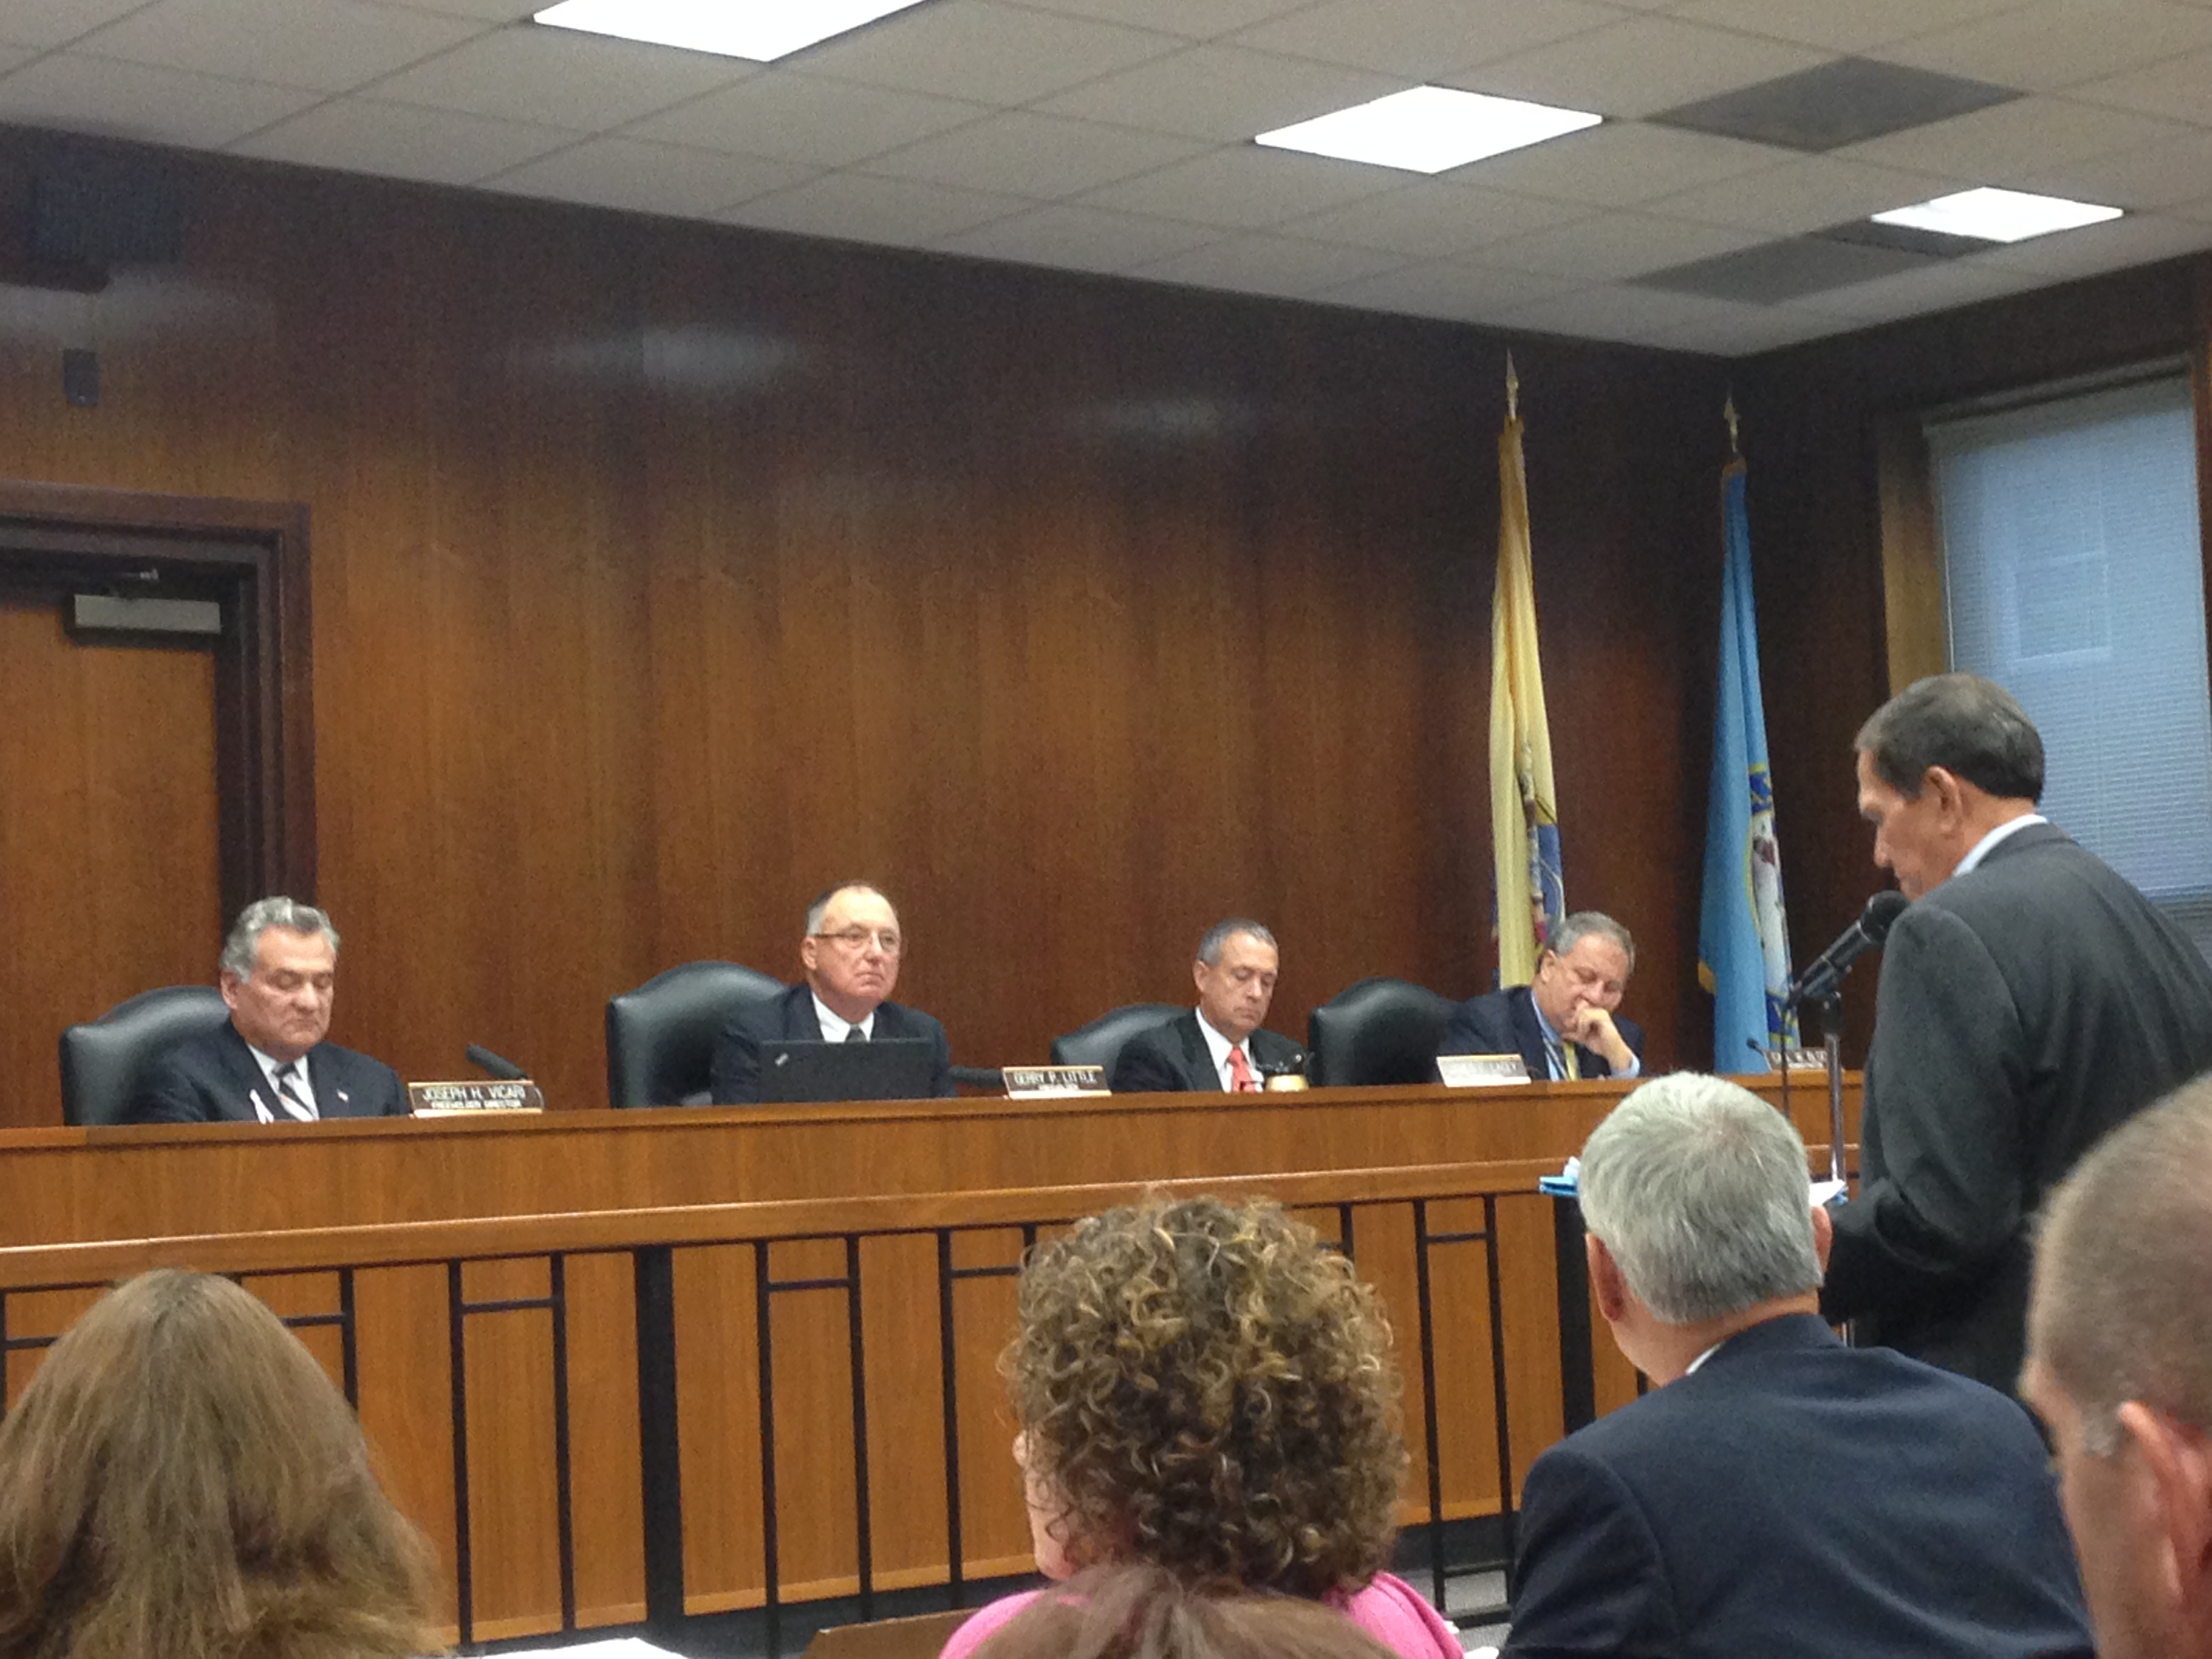 William Santos (right, at microphone) addresses the Ocean County freeholders on Oct. 15, 2014. (Photo: Daniel Nee)